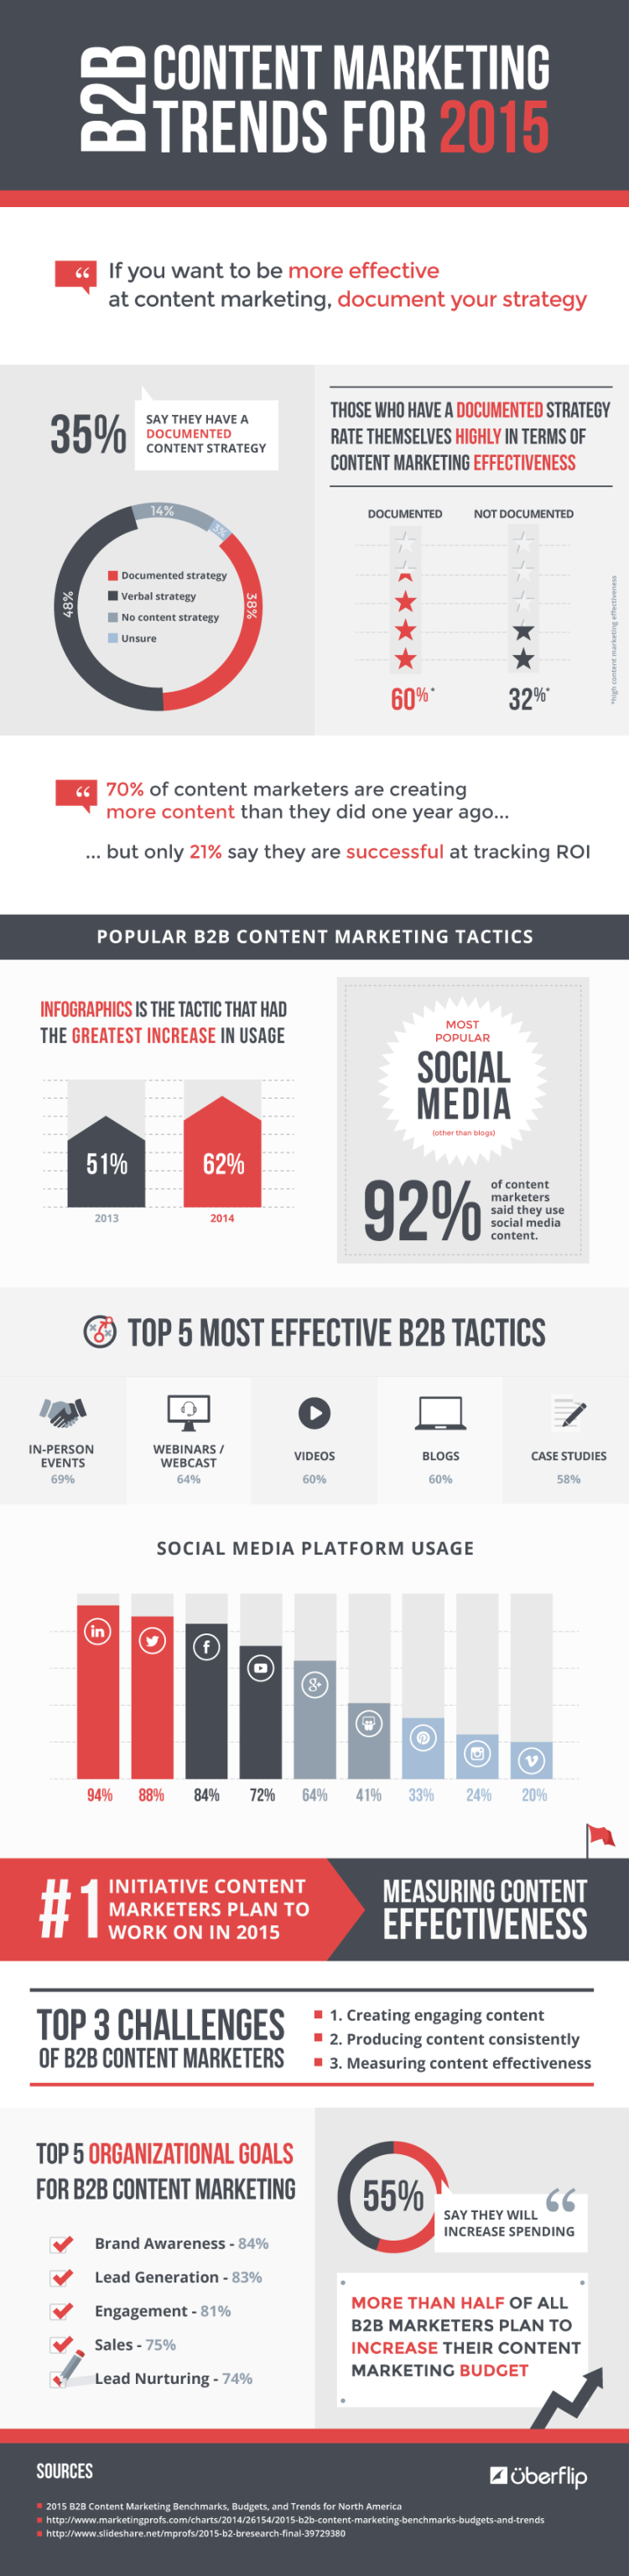 B2B Content Marketing Trends for 2015 [Infographic]